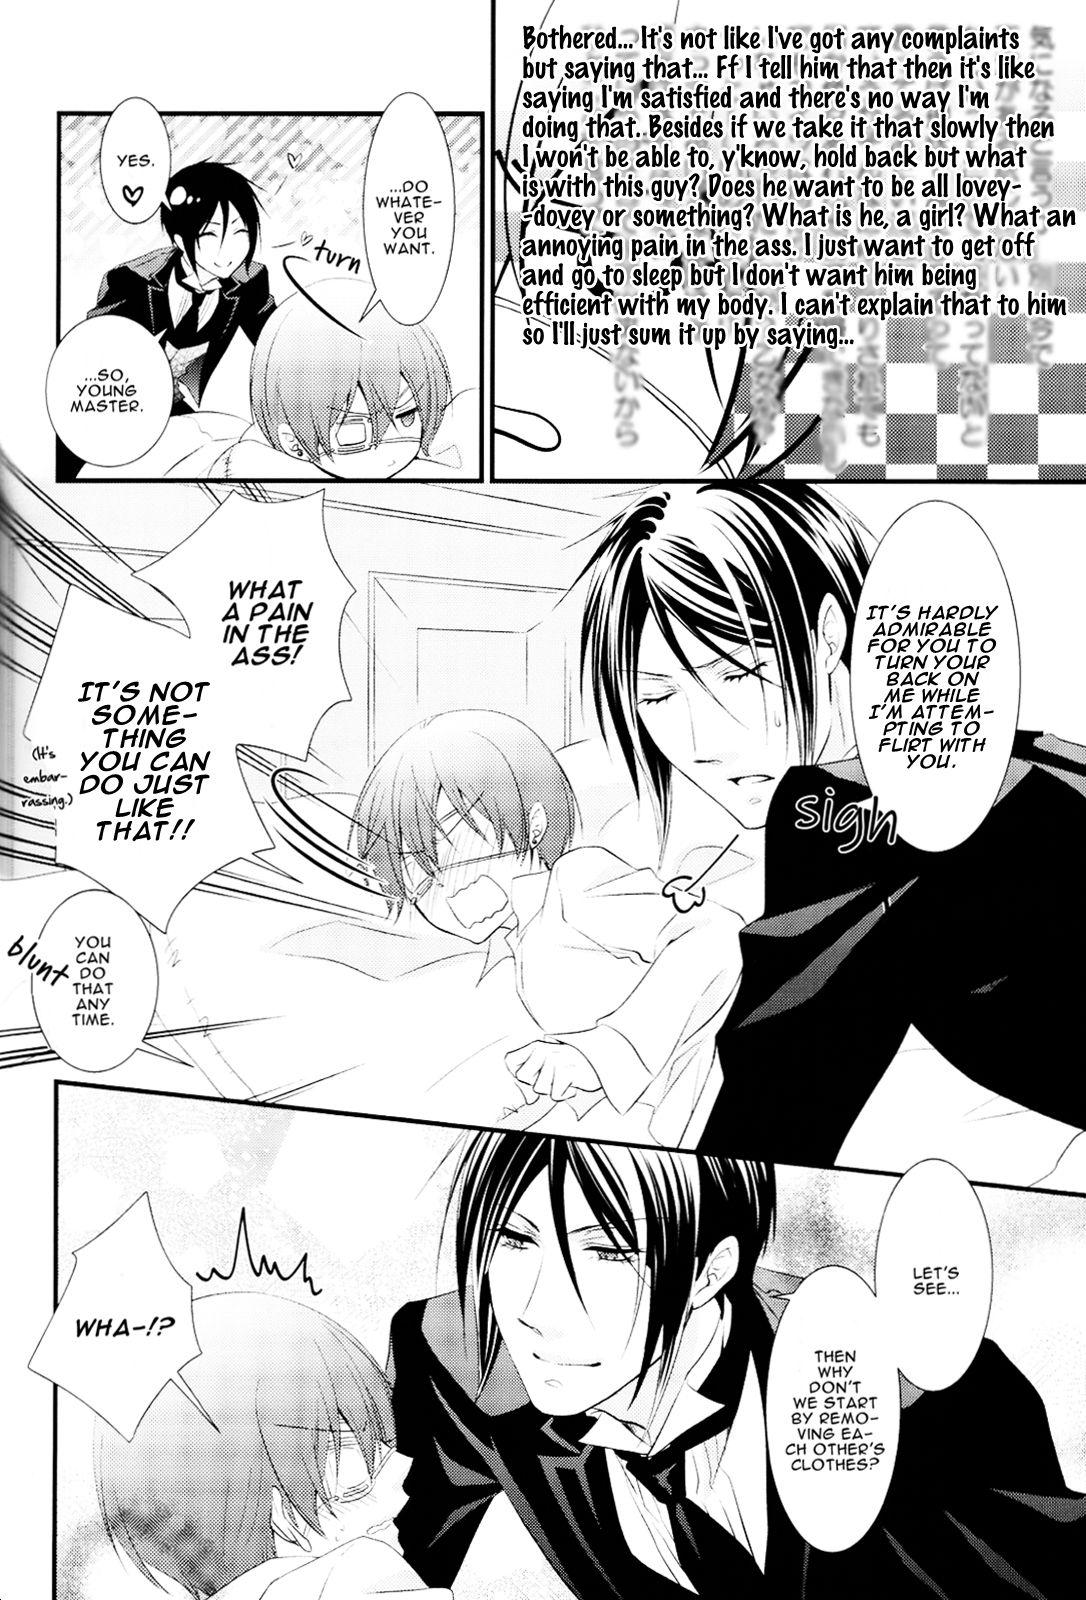 Asian Slow - Black butler Pussyfucking - Page 3